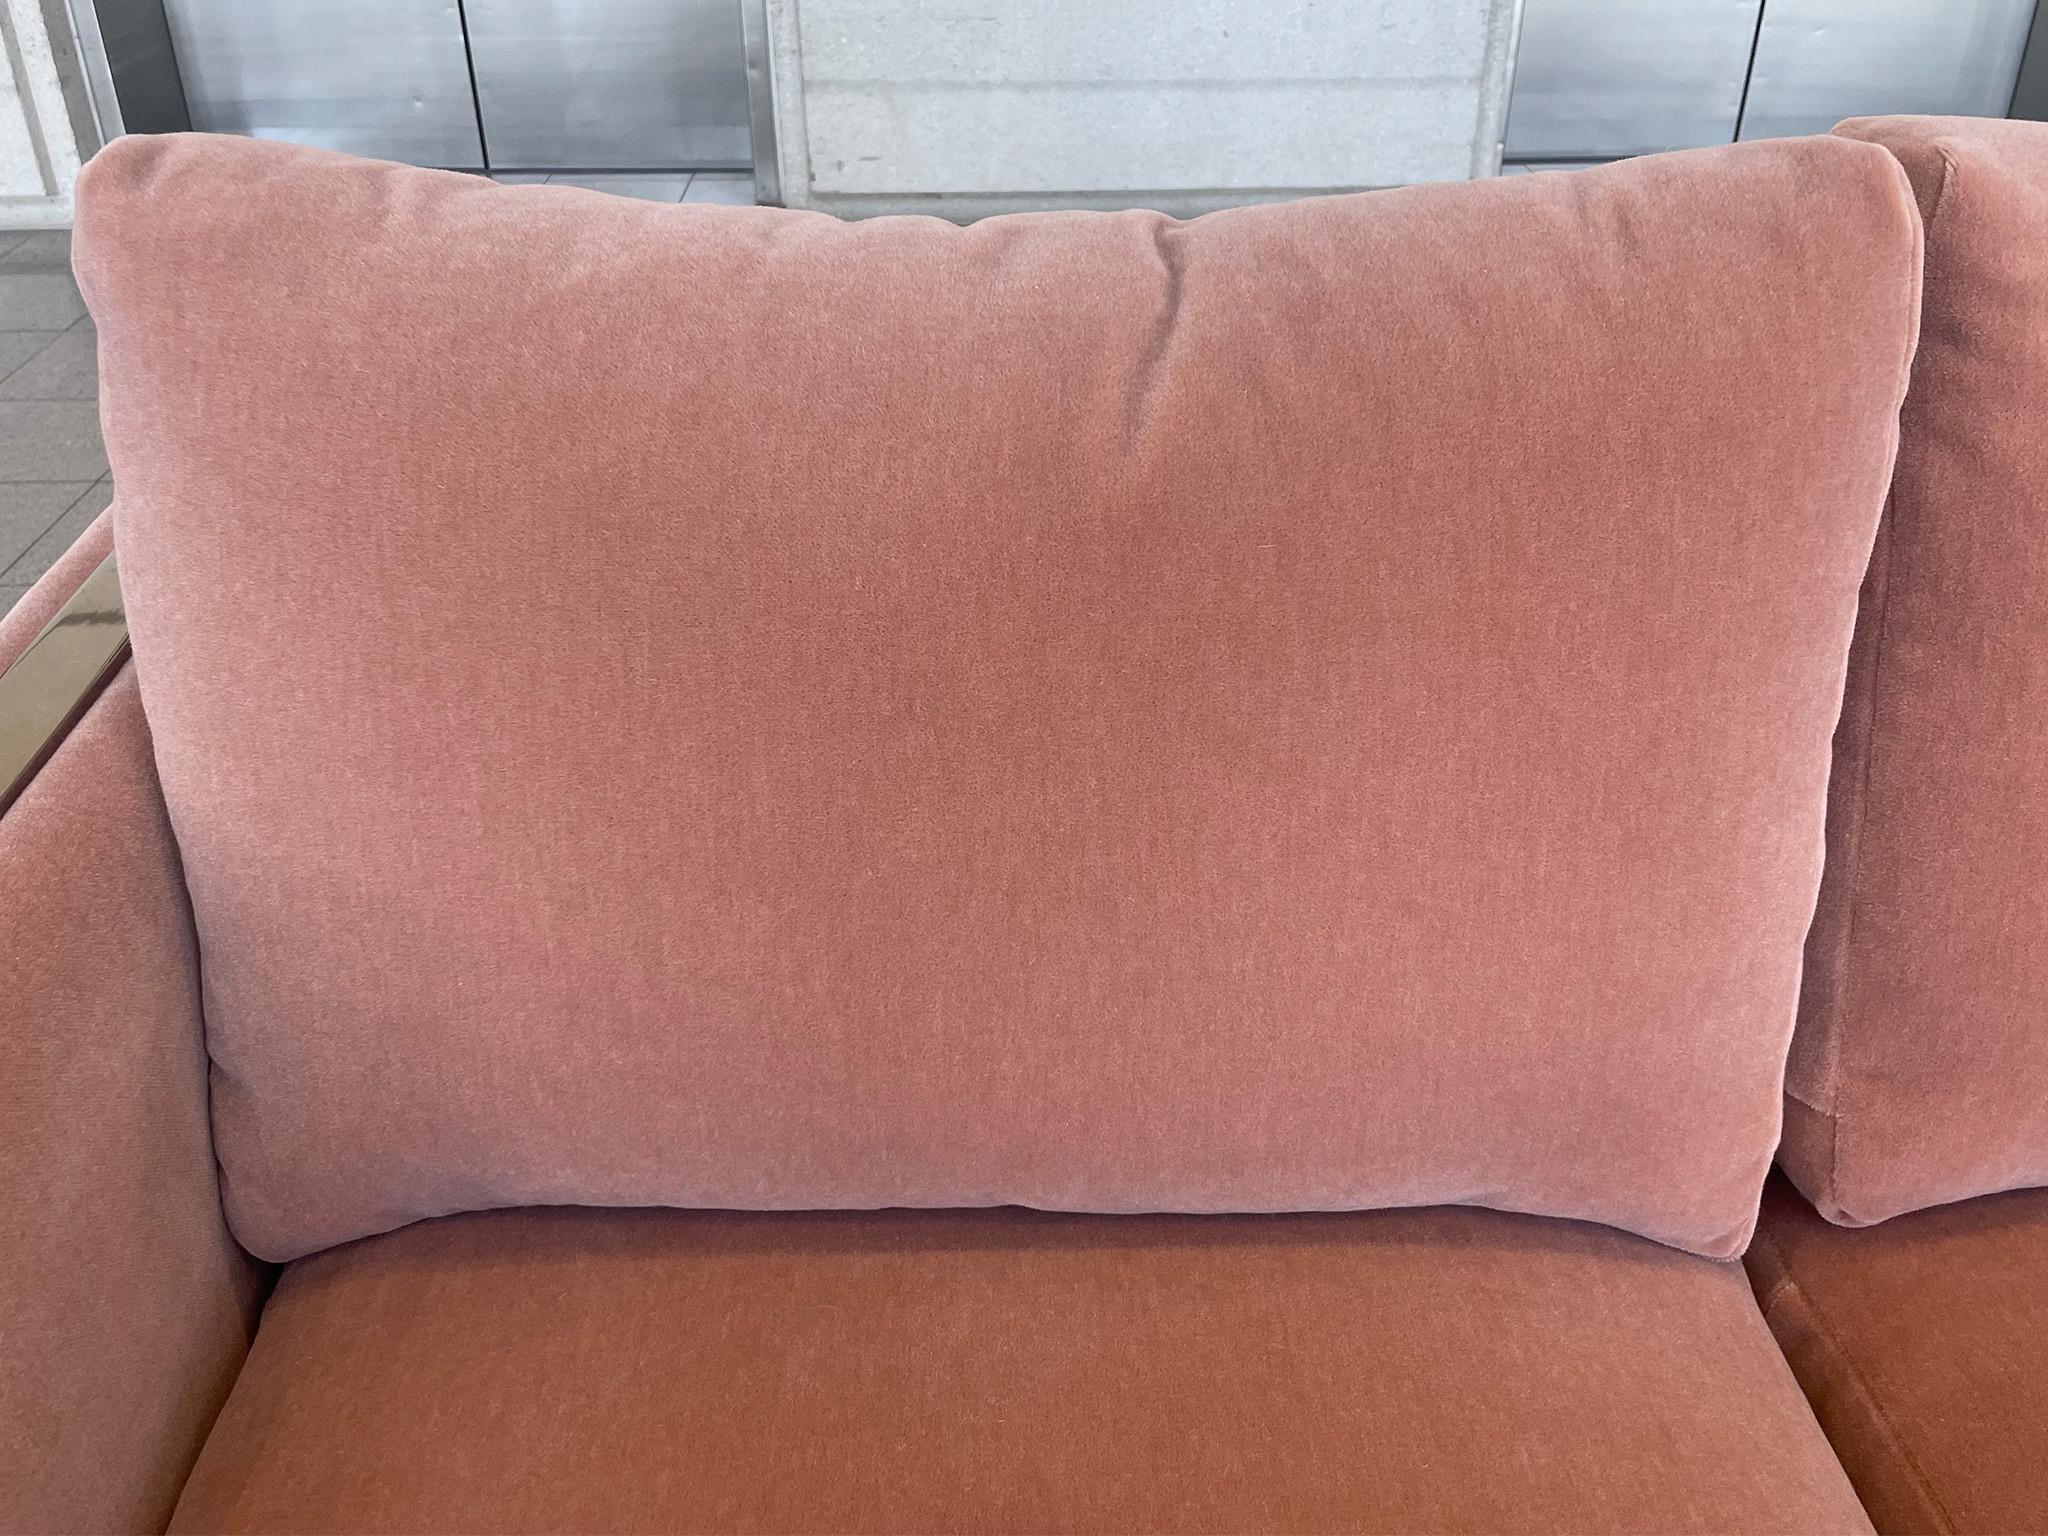 Midcentury Chrome Loveseat After Milo Baughman in Dusty Mauve Mohair For Sale 2